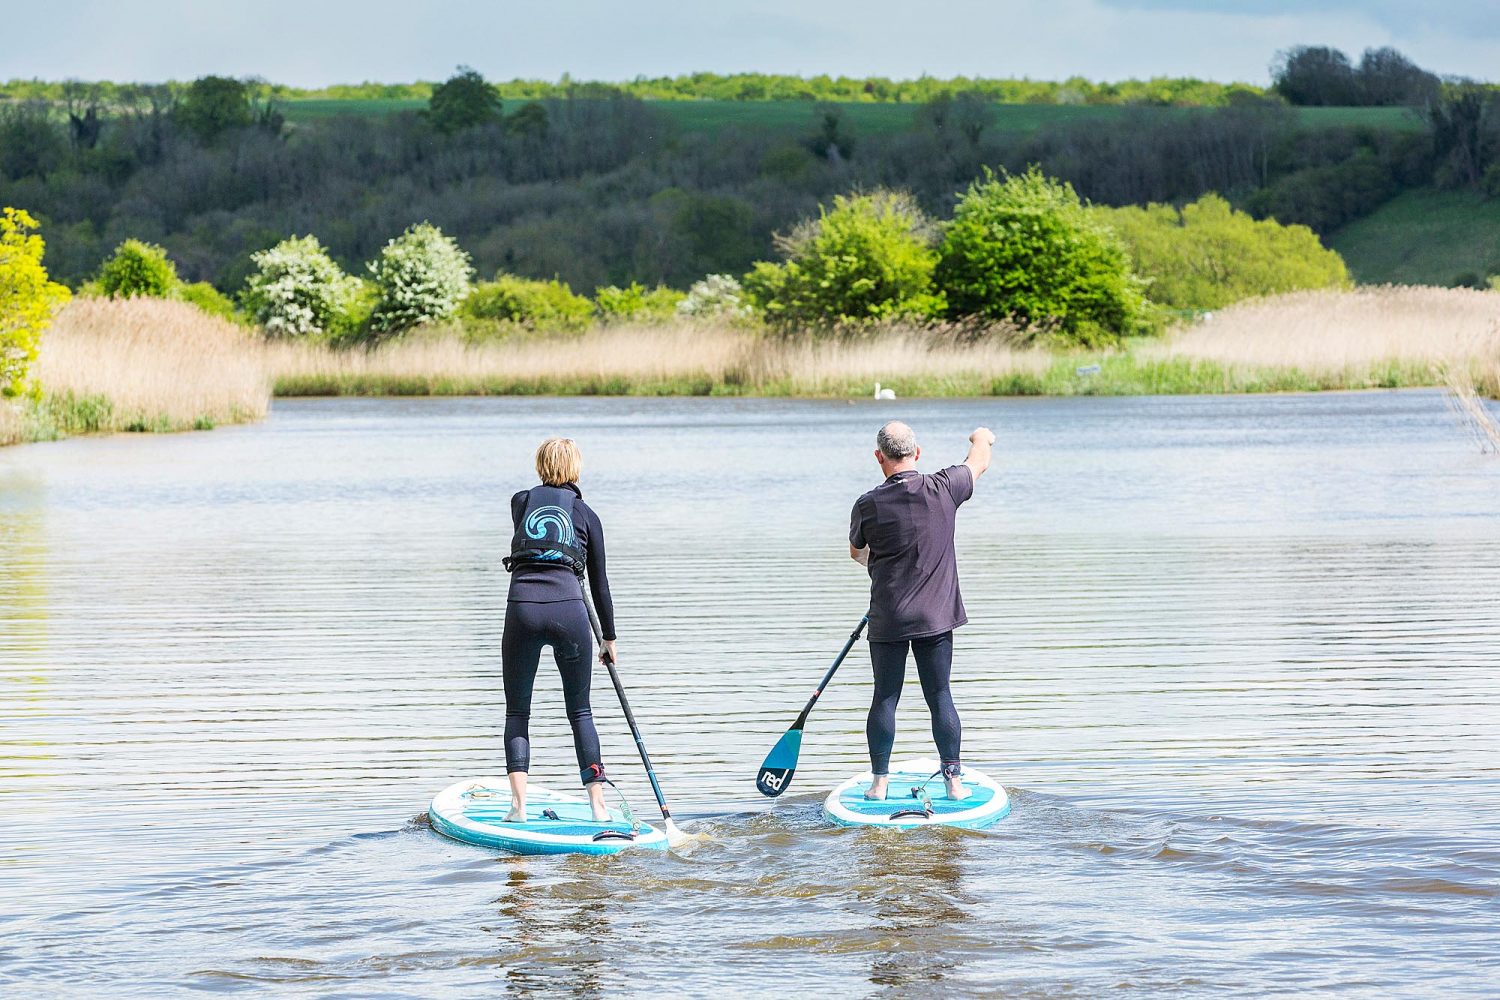 Two paddle boarders in a river